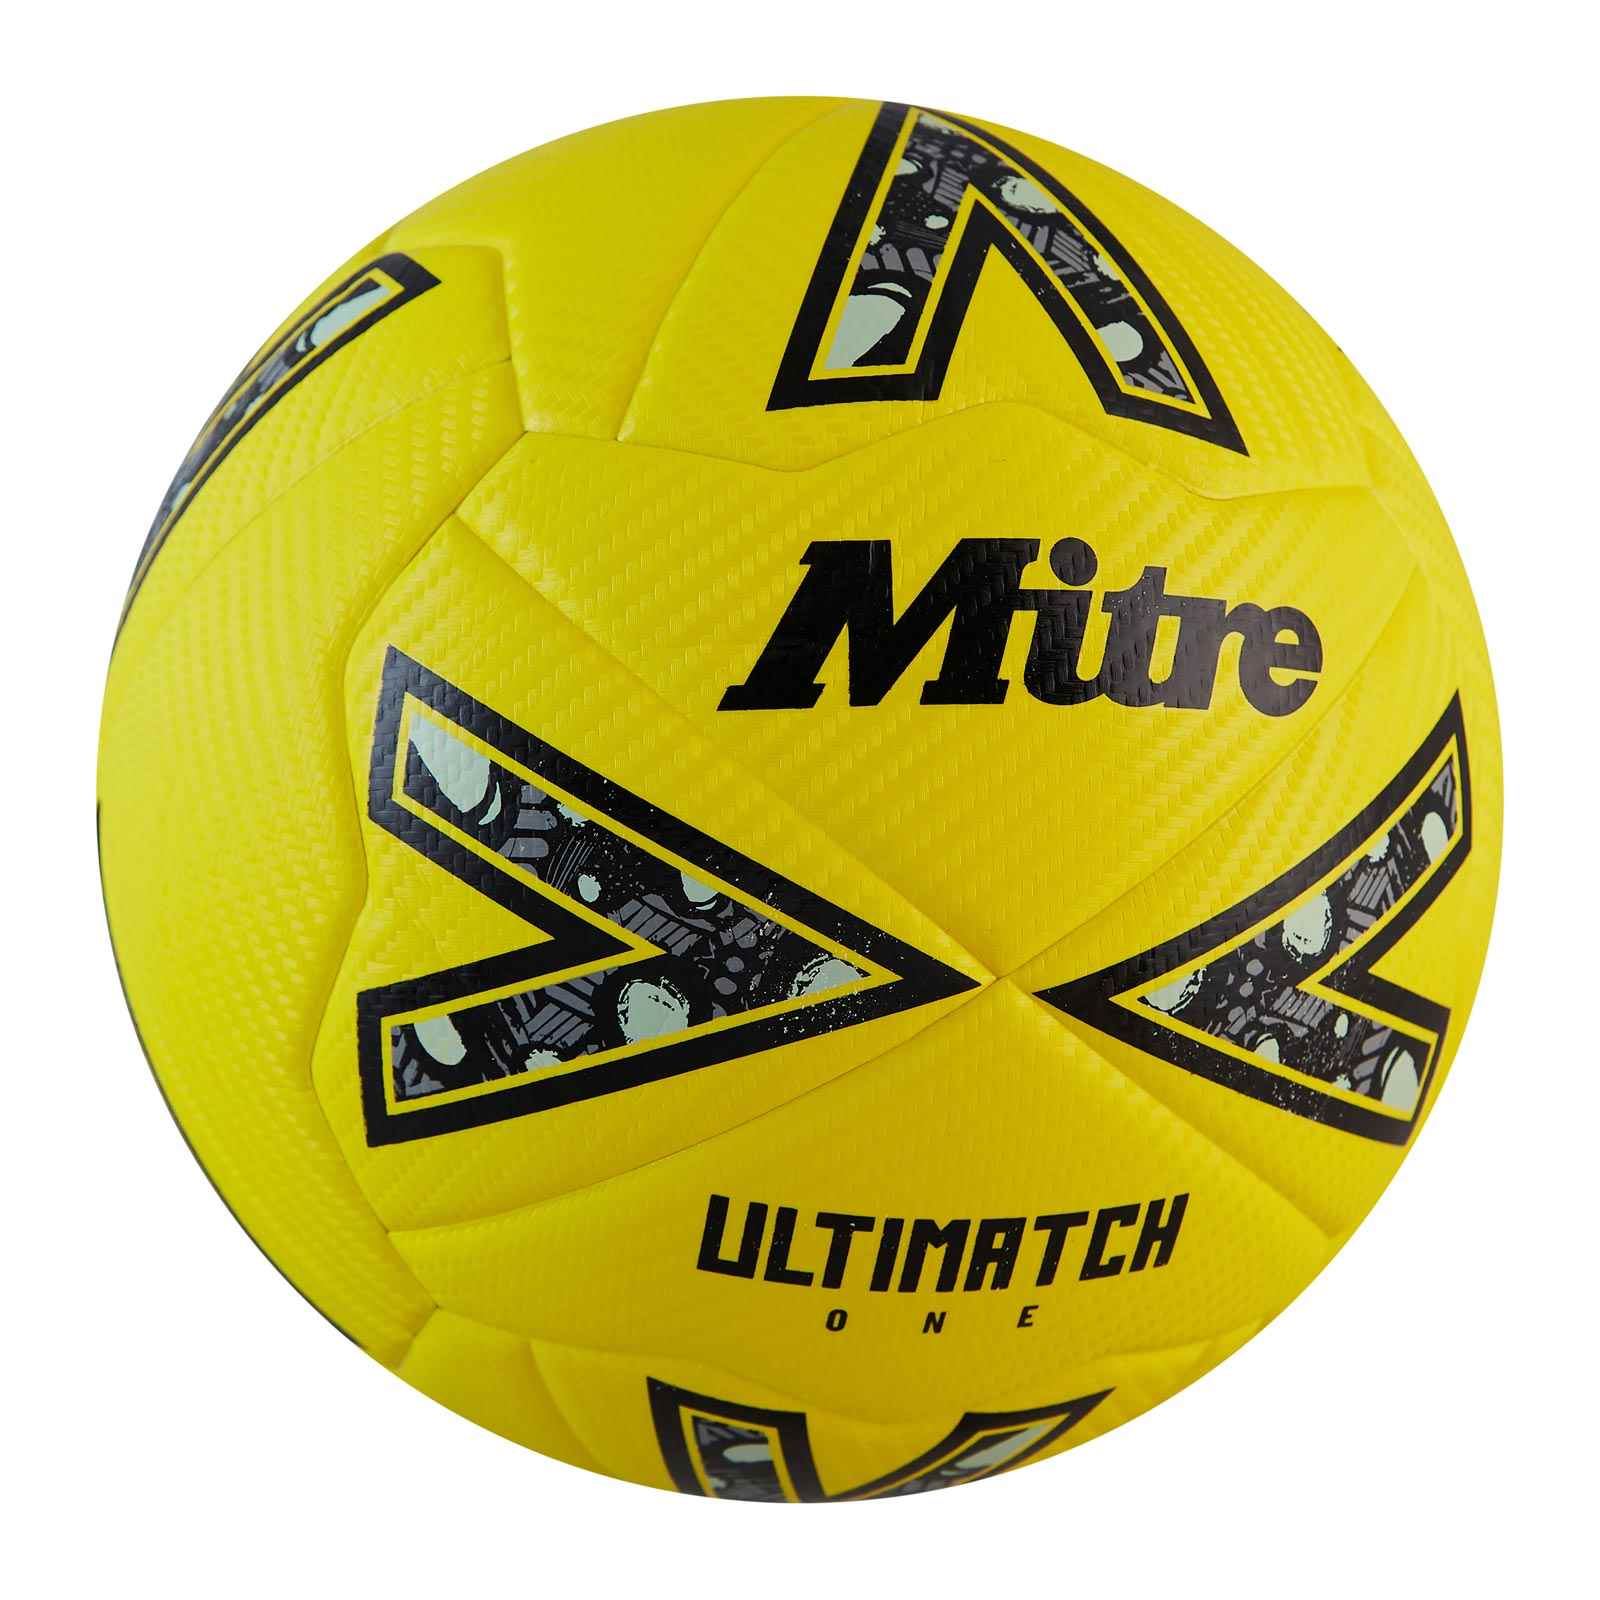 MITRE ULTIMATCH ONE 24 FOOTBALL - SIZE 5